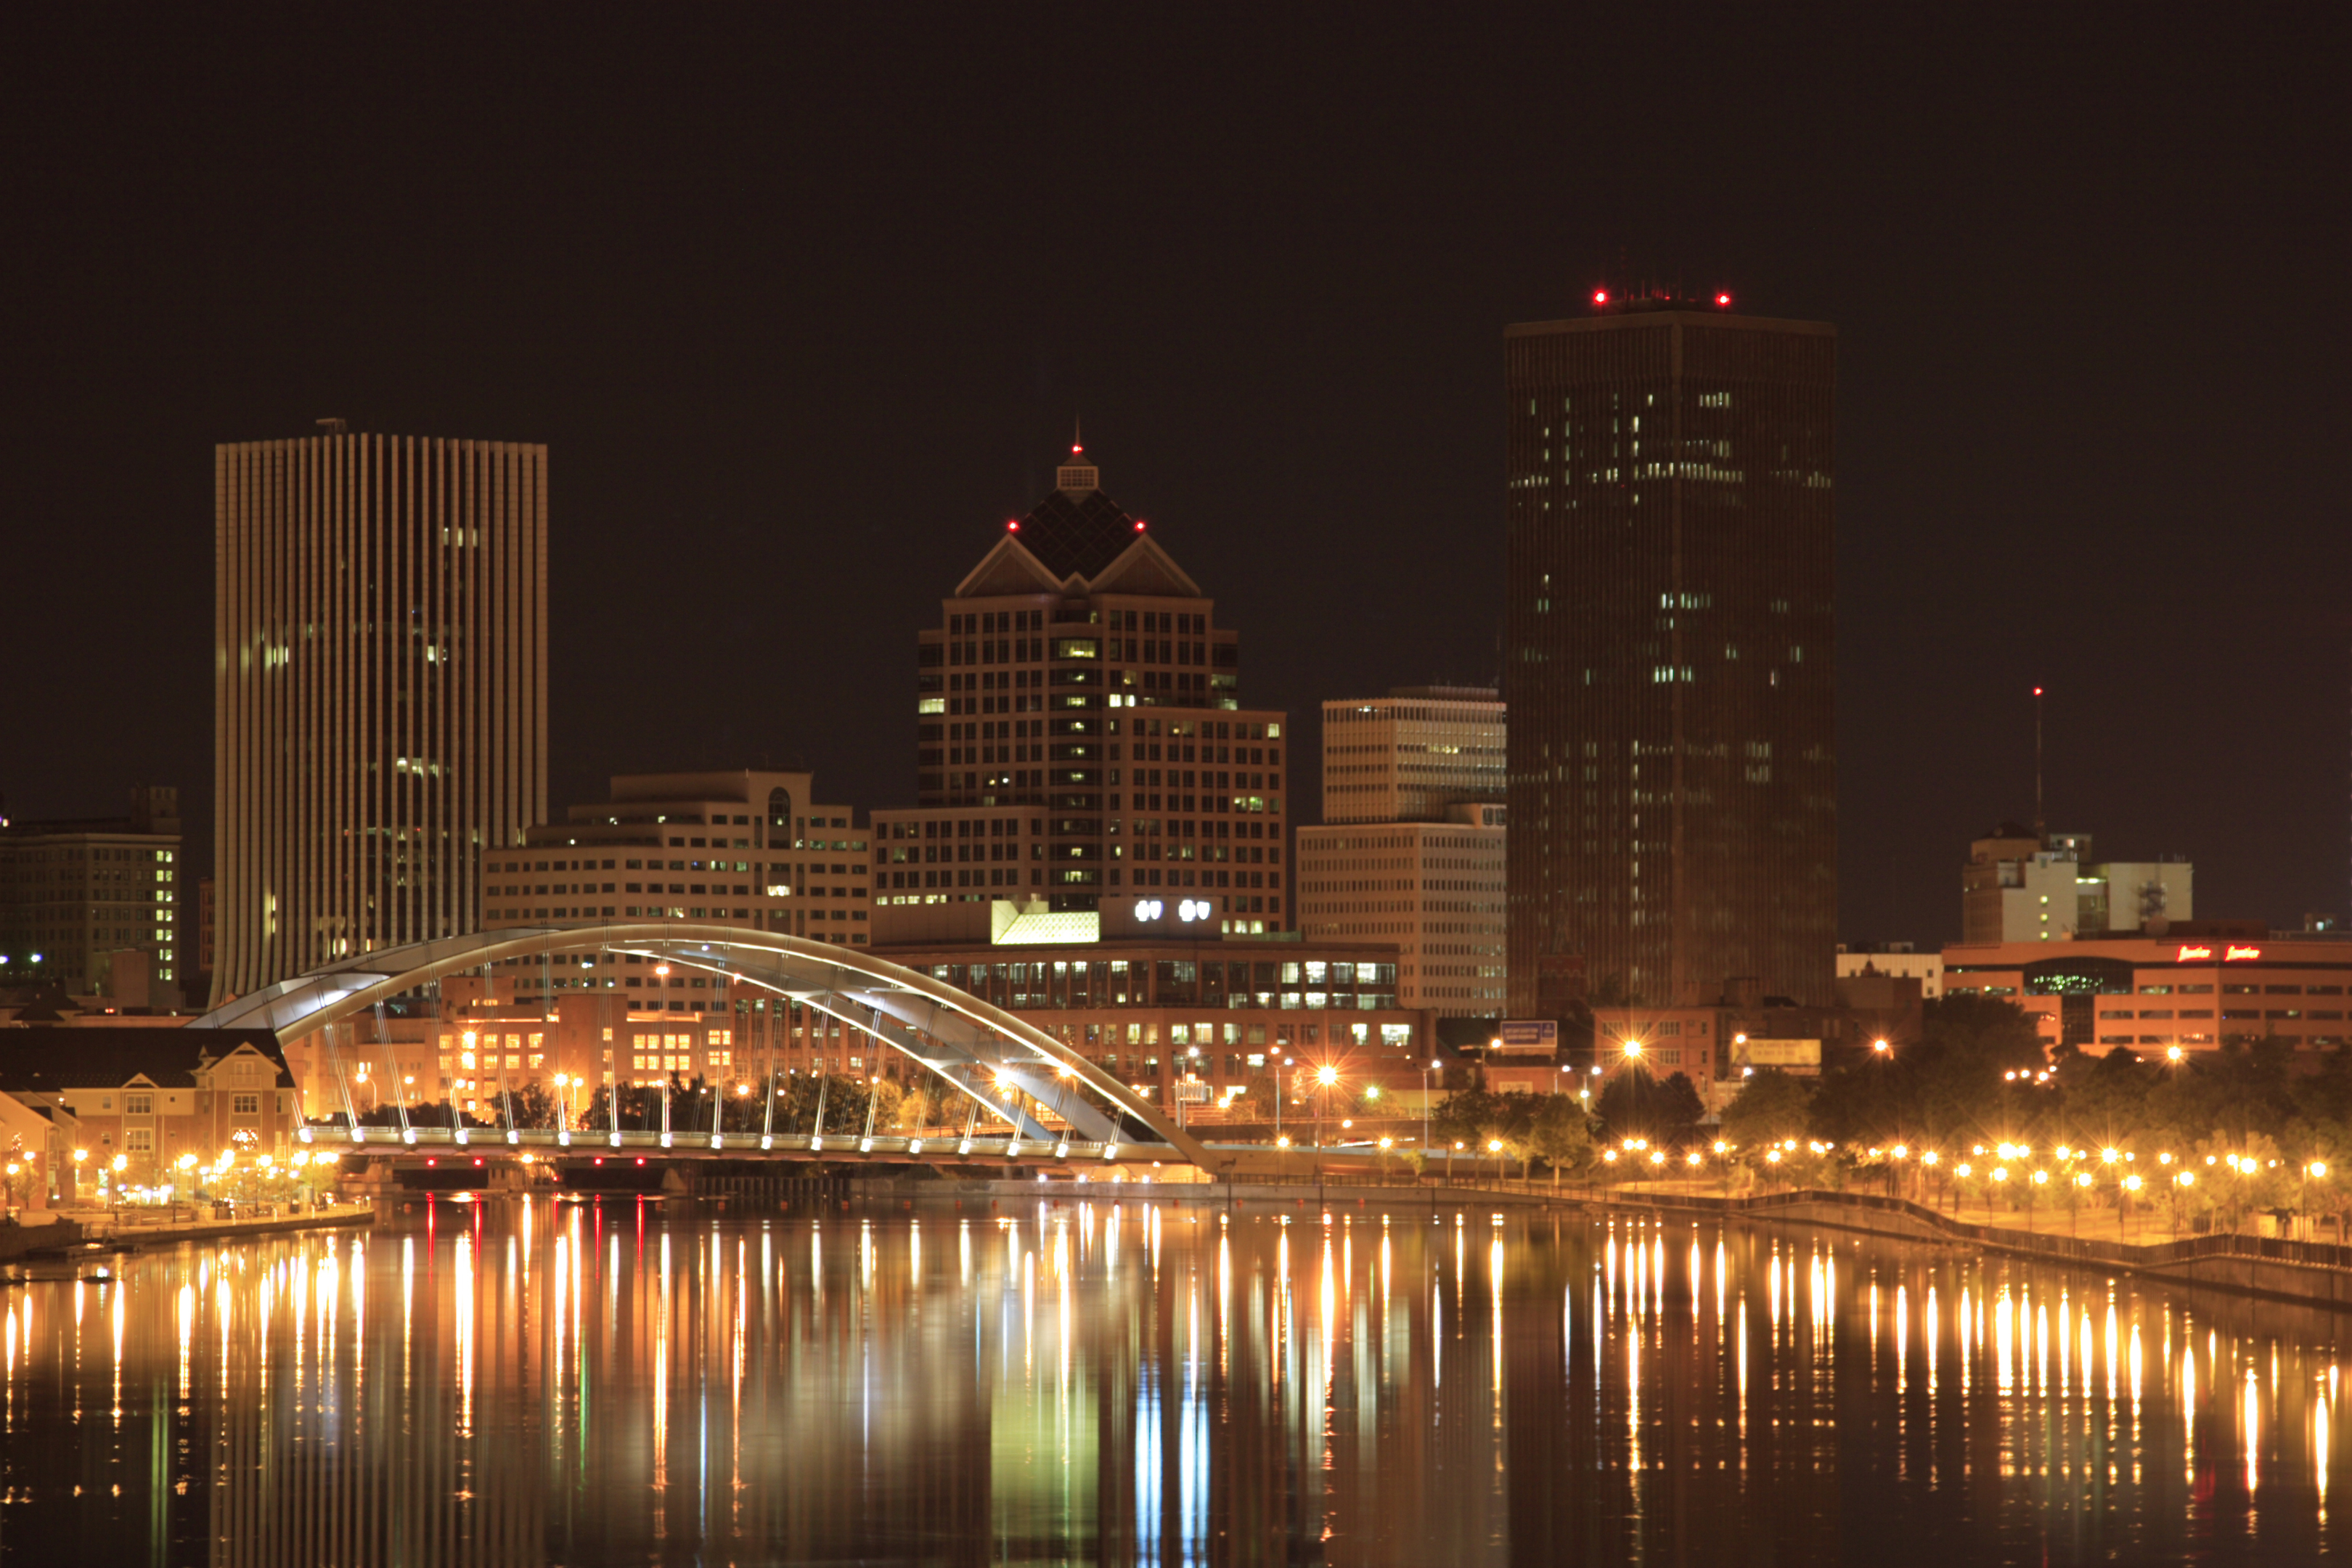 Rochester, NY downtown at night with the city reflecting off of the Genesee river.